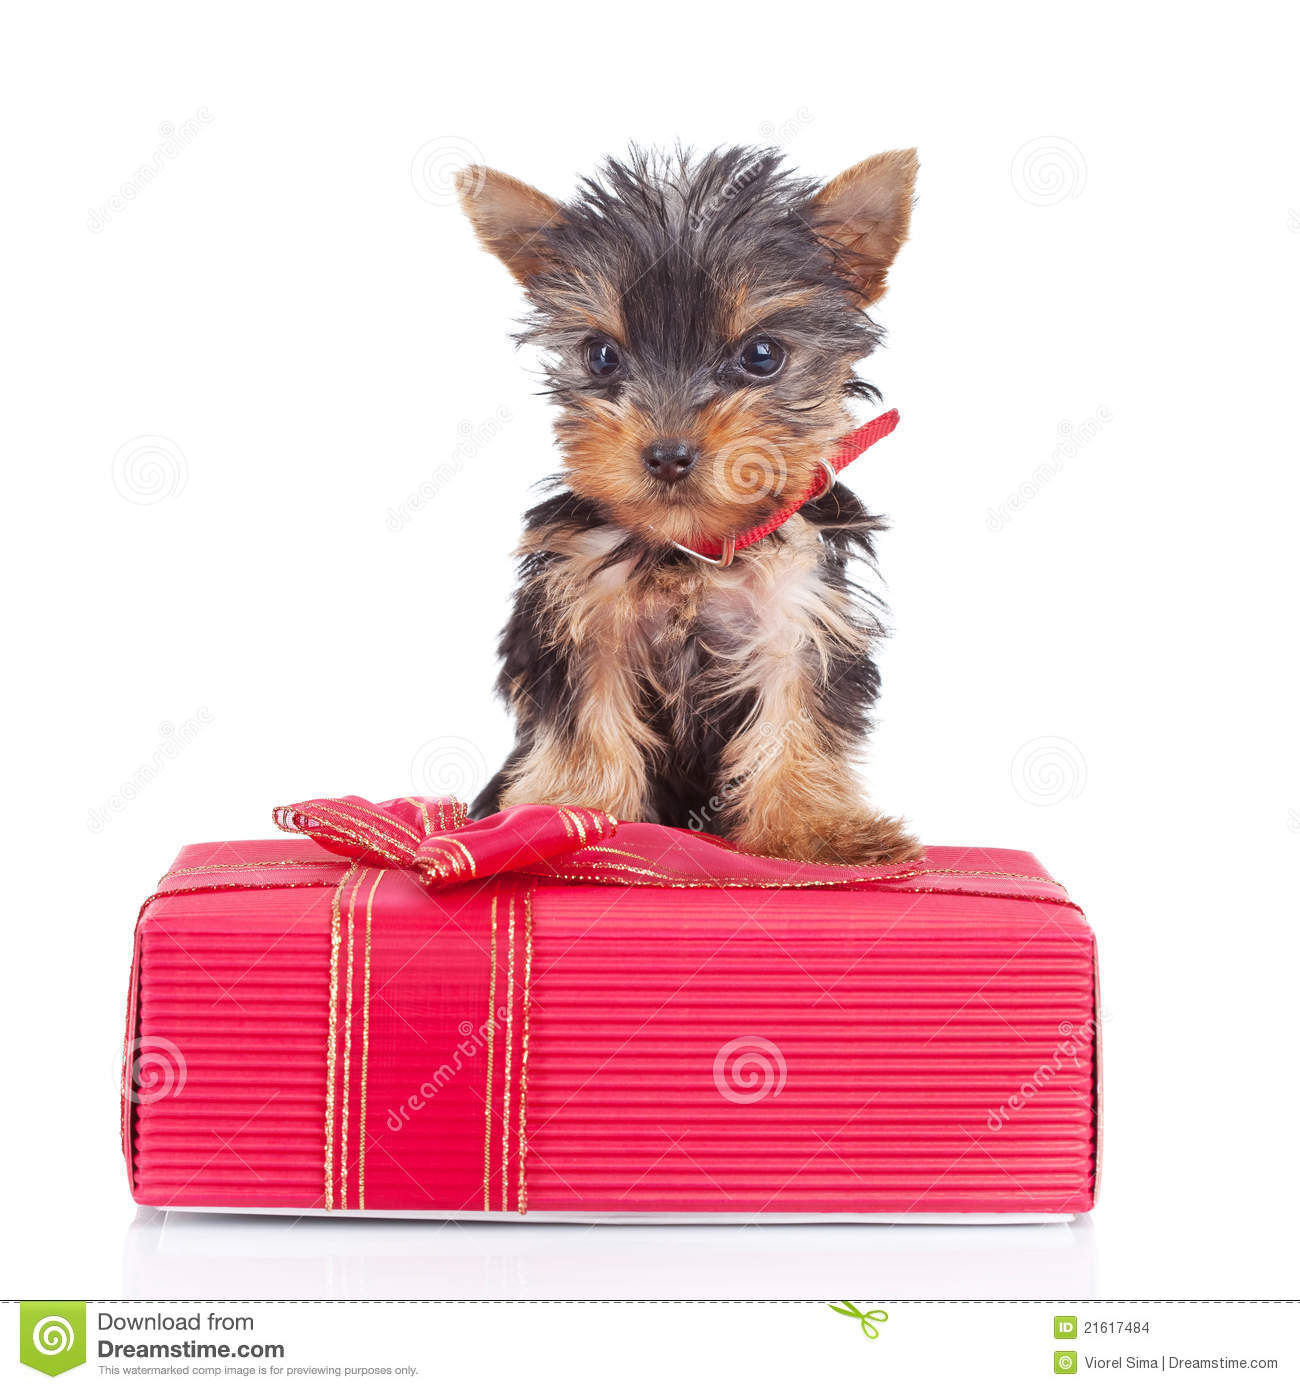 Yorkie Toy Standing On A Gift Stock Images   Image  21617484